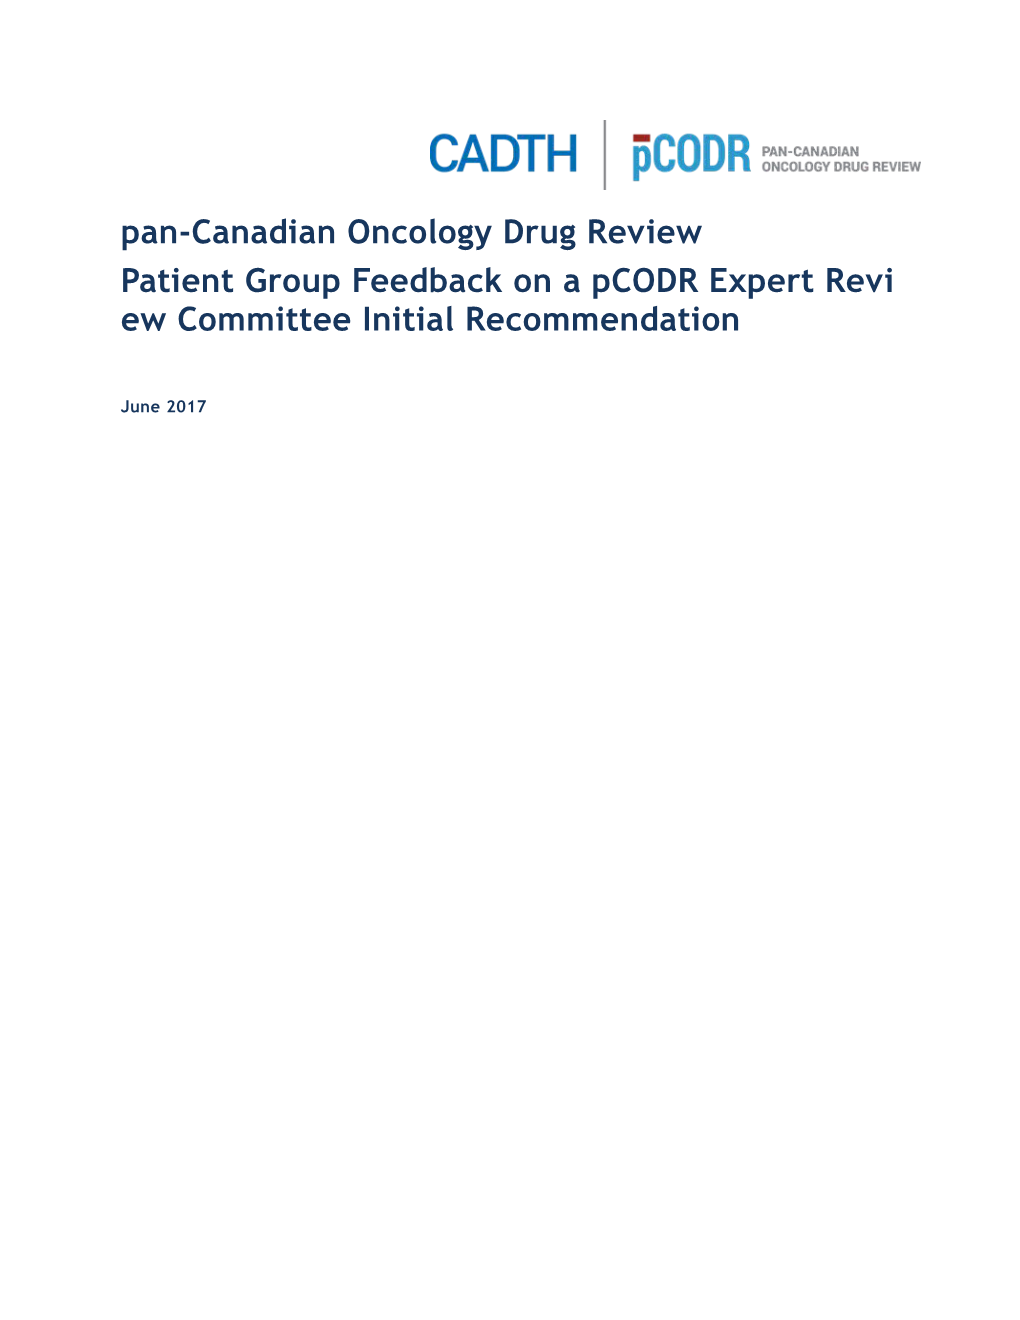 Pan-Canadian Oncology Drug Review